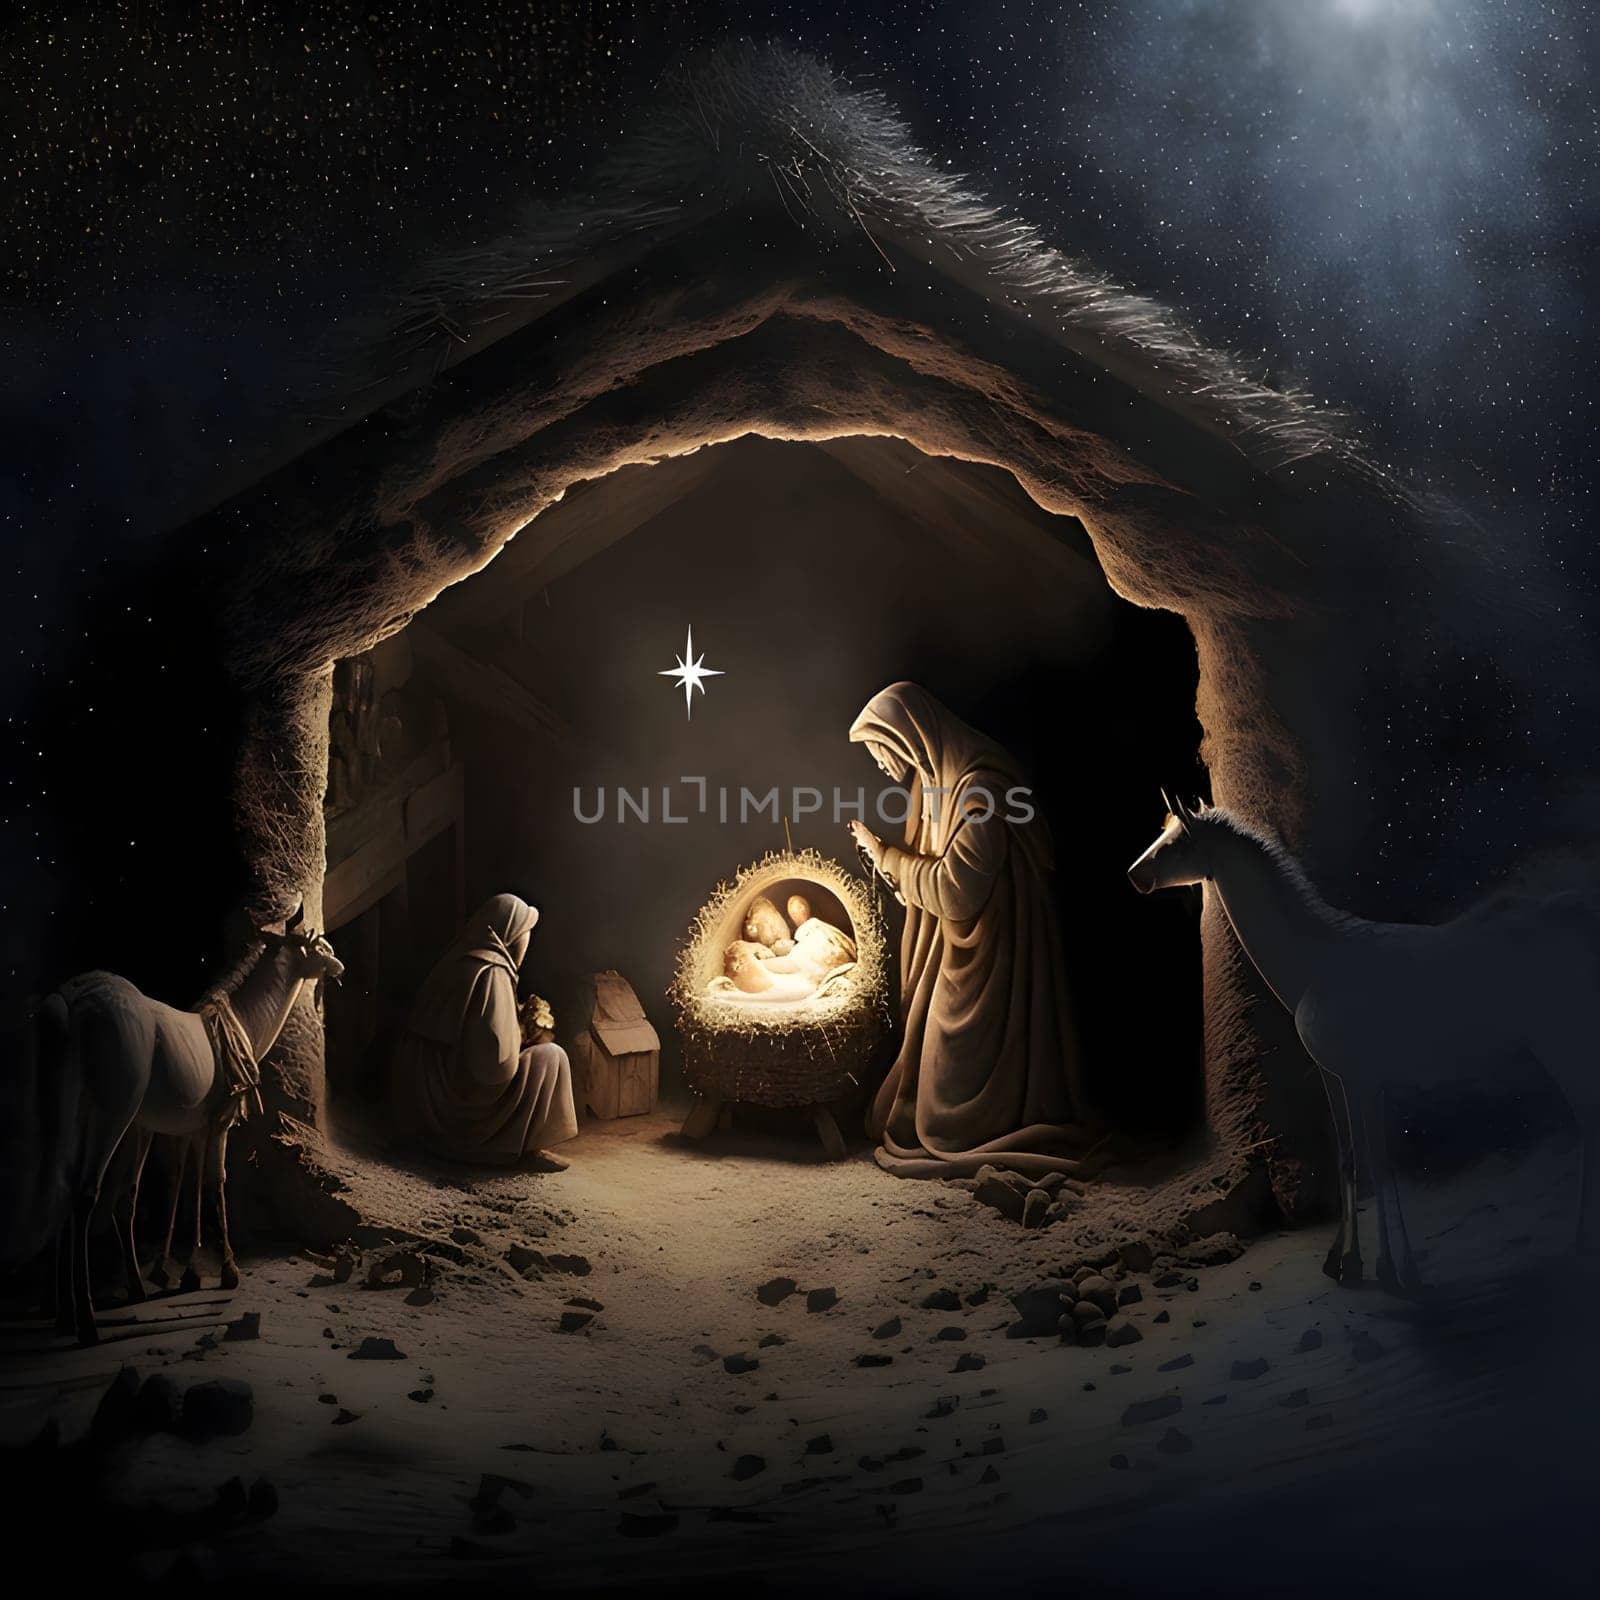 The nativity scene; St. Mary with St. Joseph and the baby Jesus, with animals around. The Christmas star as a symbol of the birth of the savior. A Time of Joy and Celebration.